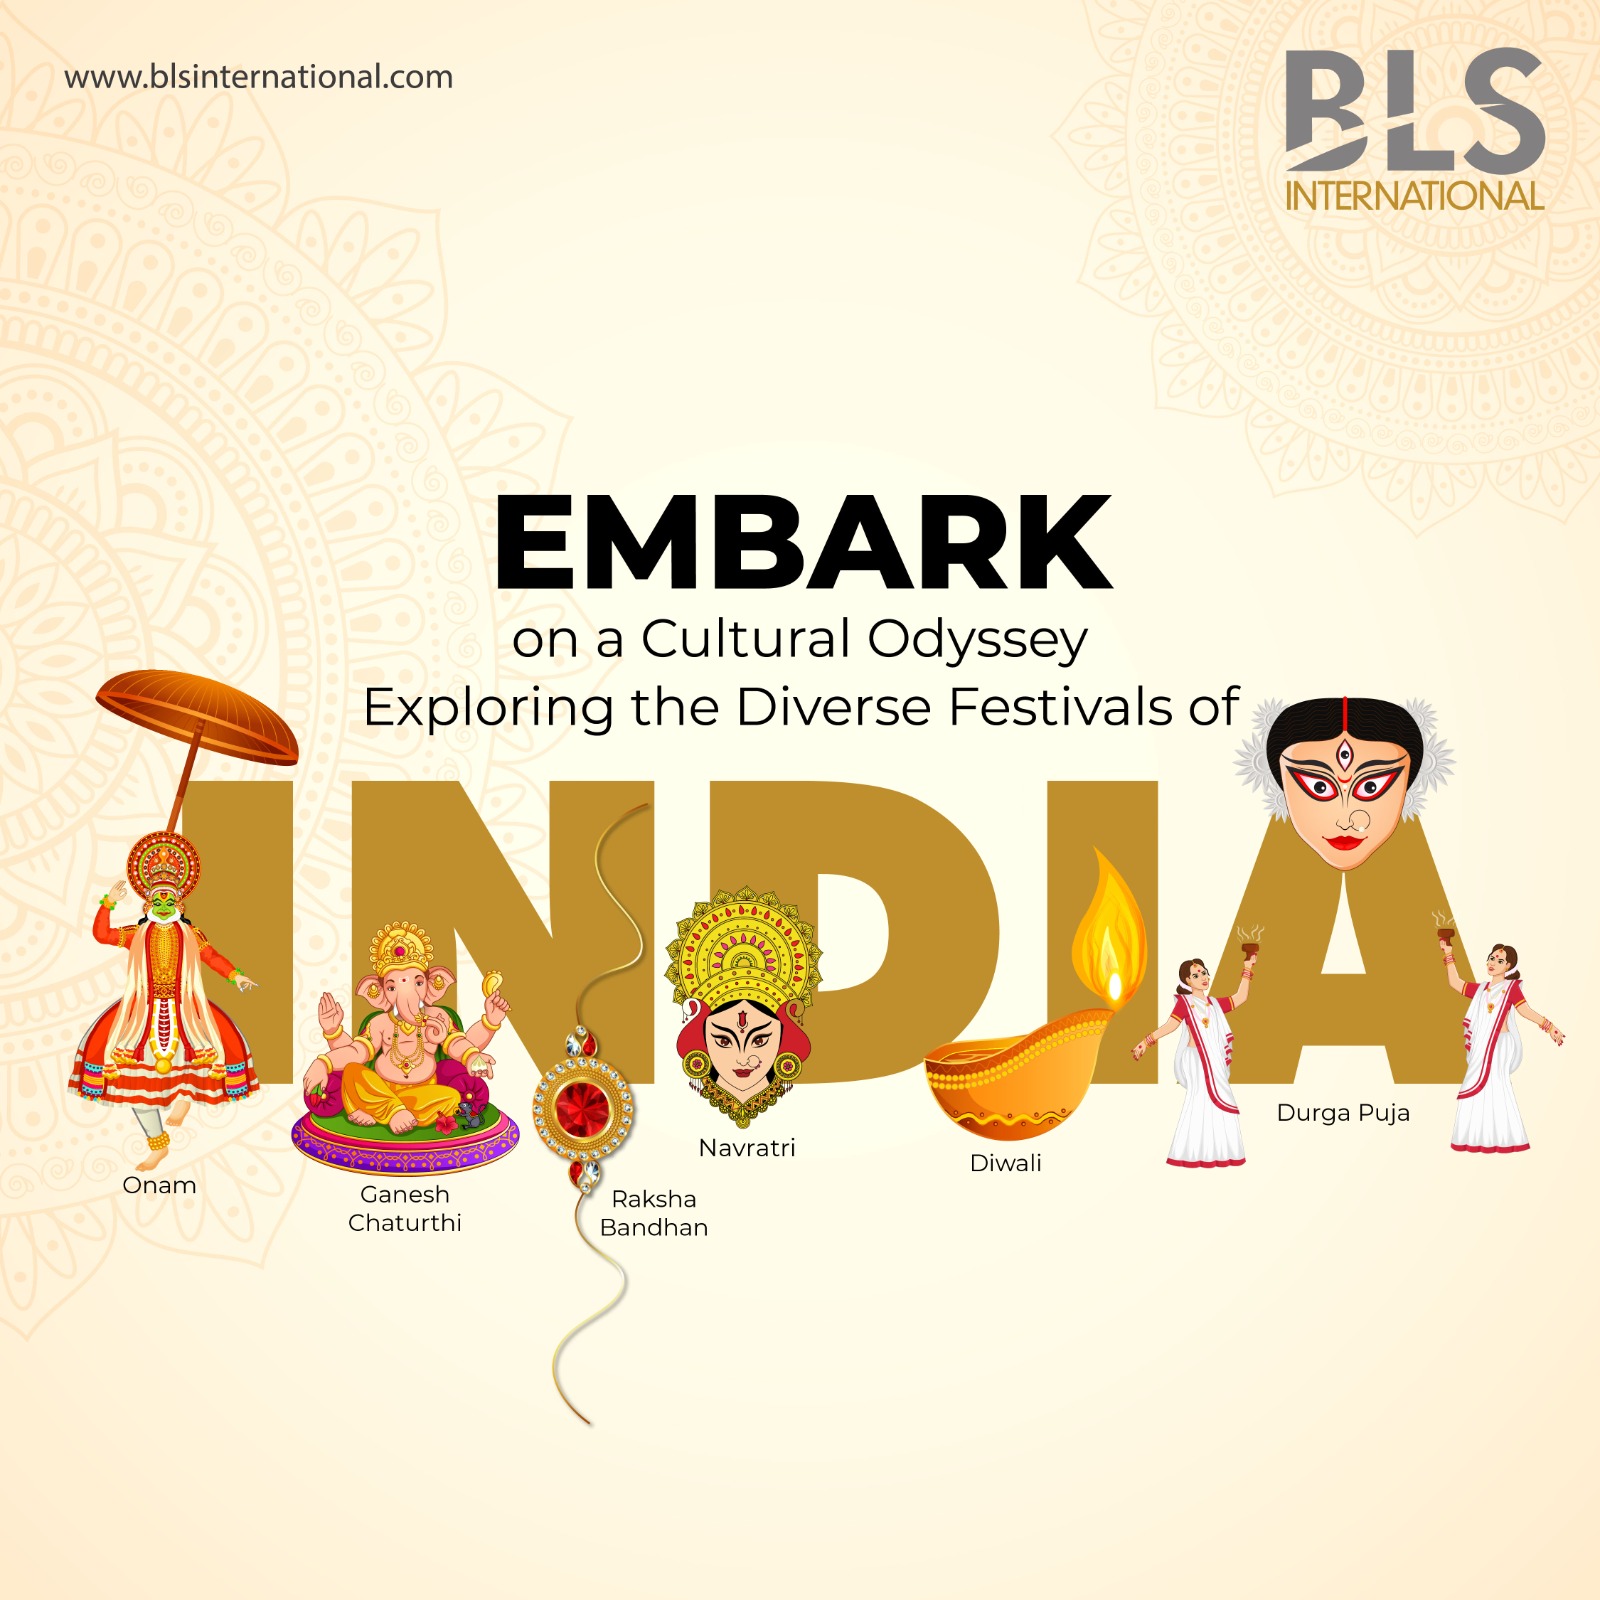 <strong>Embark on a Cultural Odyssey: Exploring the Diverse Festivals of India</strong>